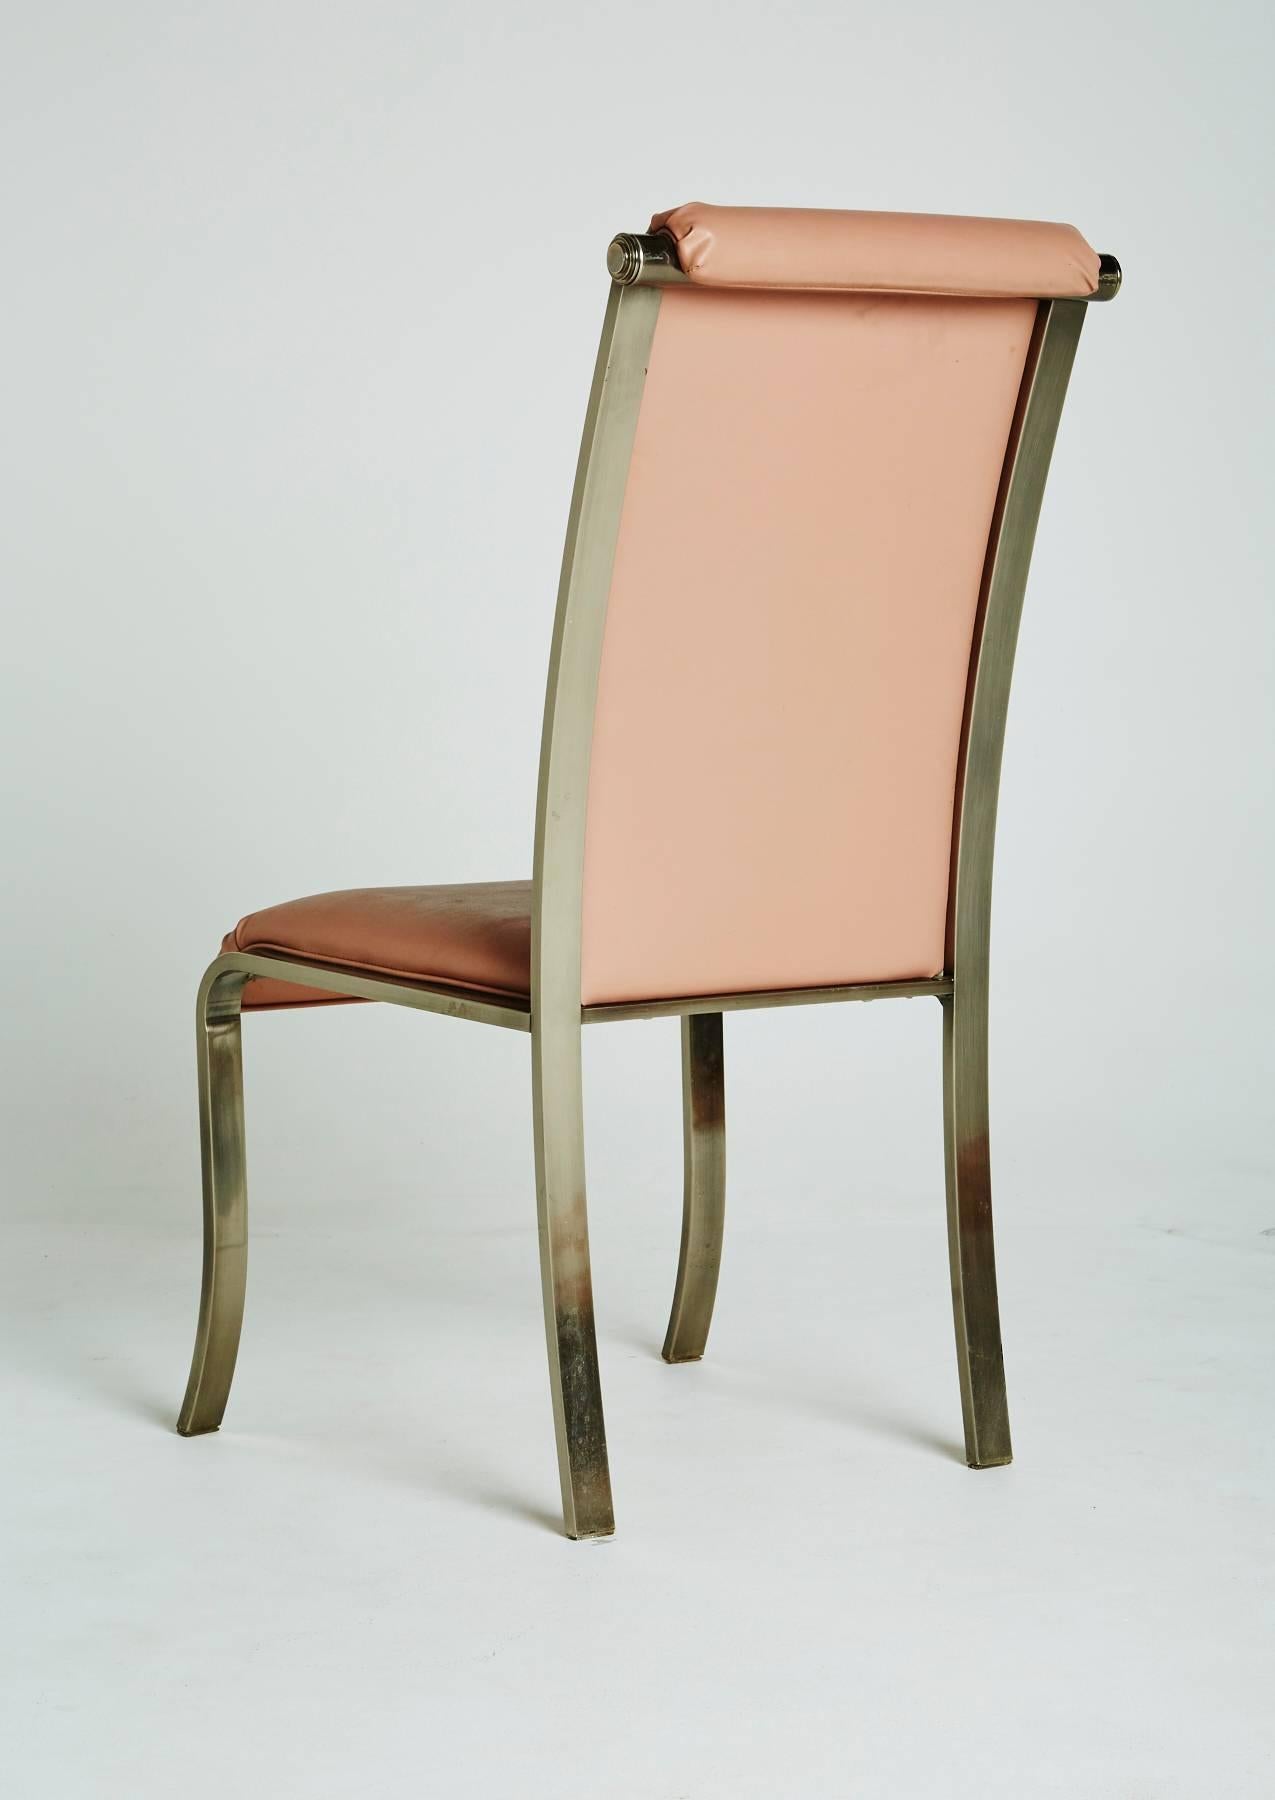 American Milo Baughman for Design Institute of America Dining Chairs